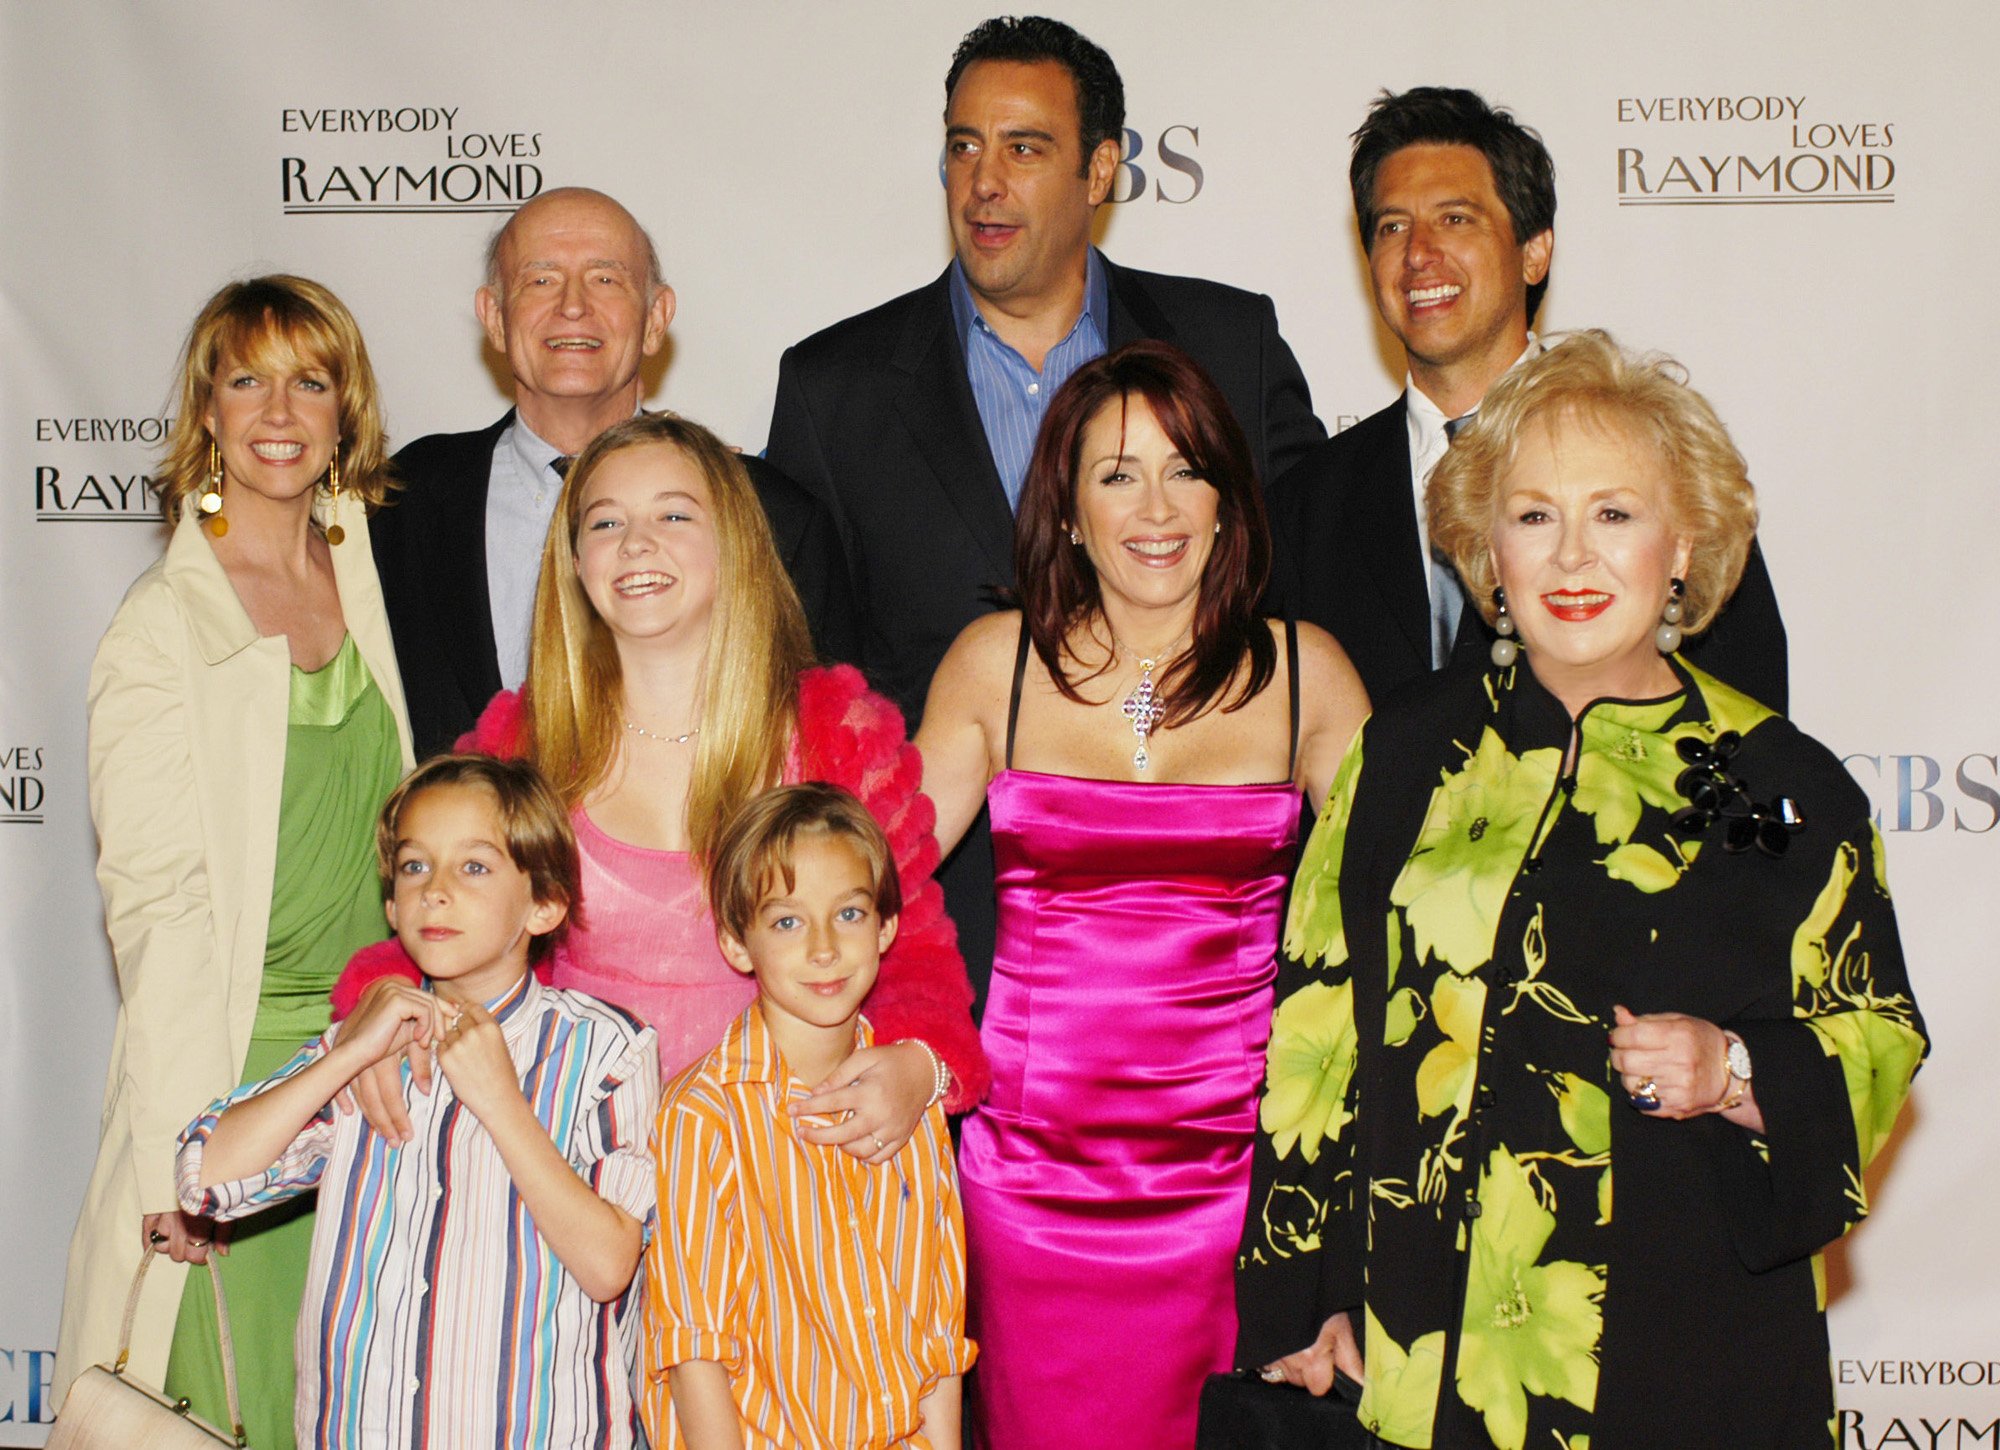 The cast of 'Everybody Loves Raymond' poses for a photo during the series' wrap party, 2005